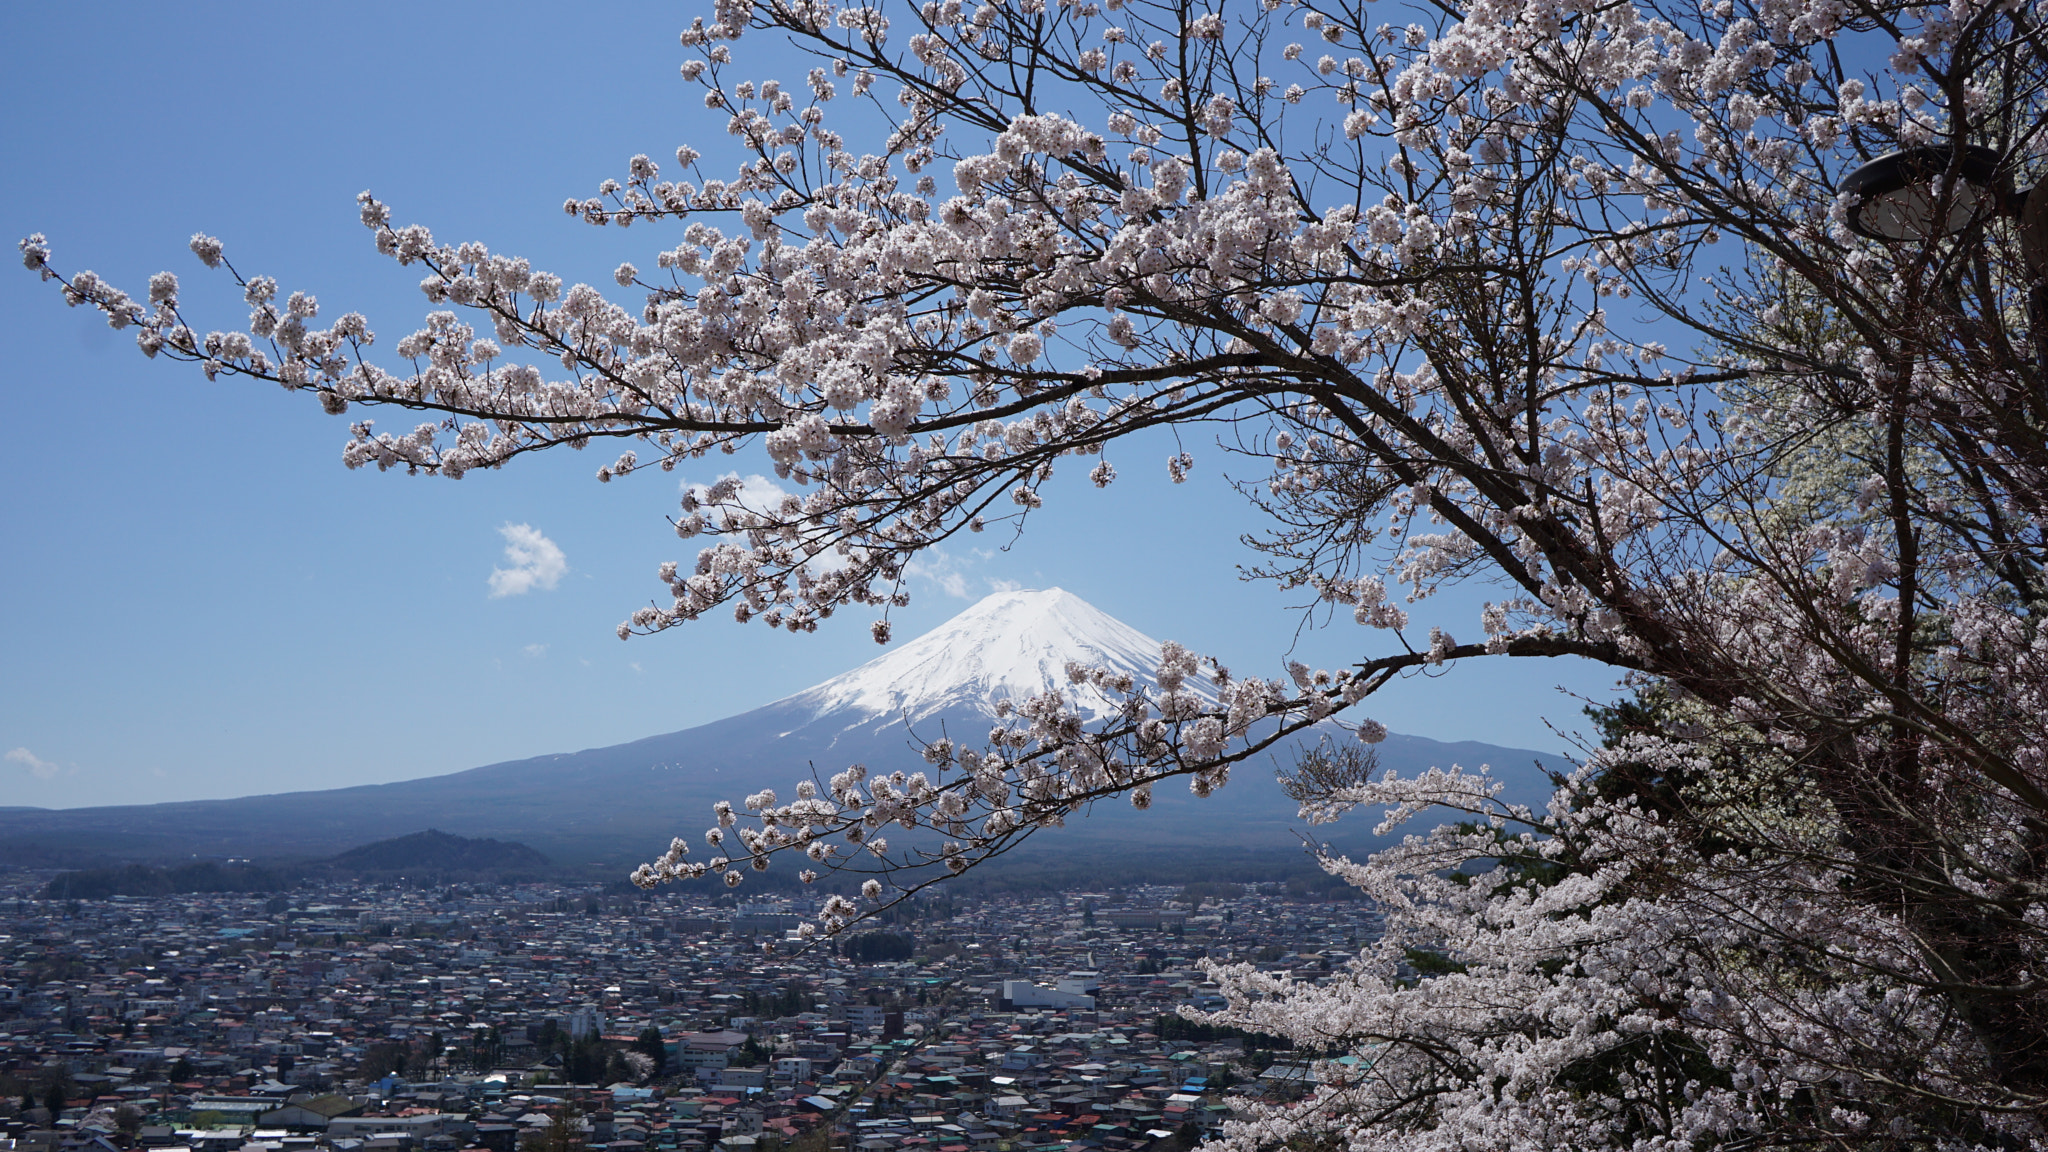 Sony a5100 sample photo. Mt.fuji in spring photography